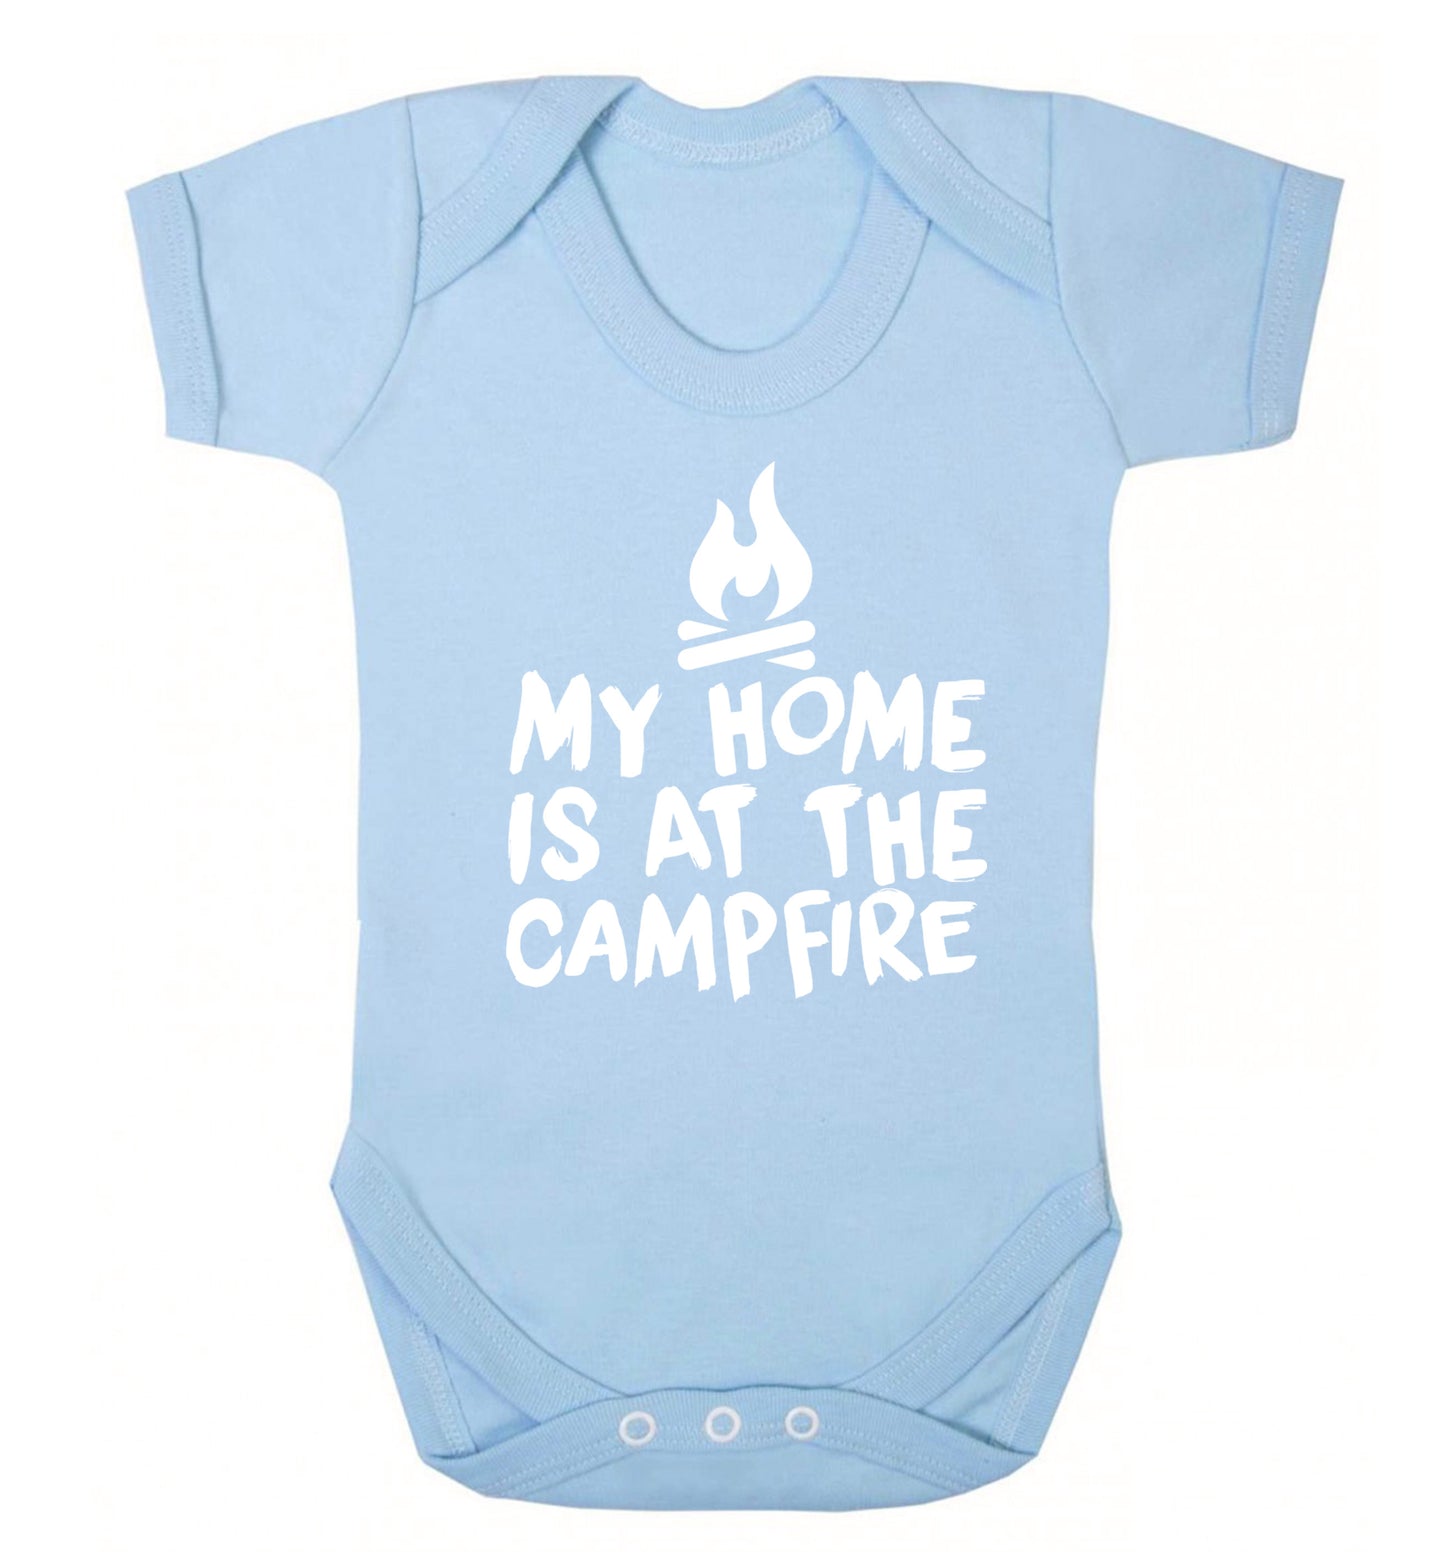 My home is at the campfire Baby Vest pale blue 18-24 months